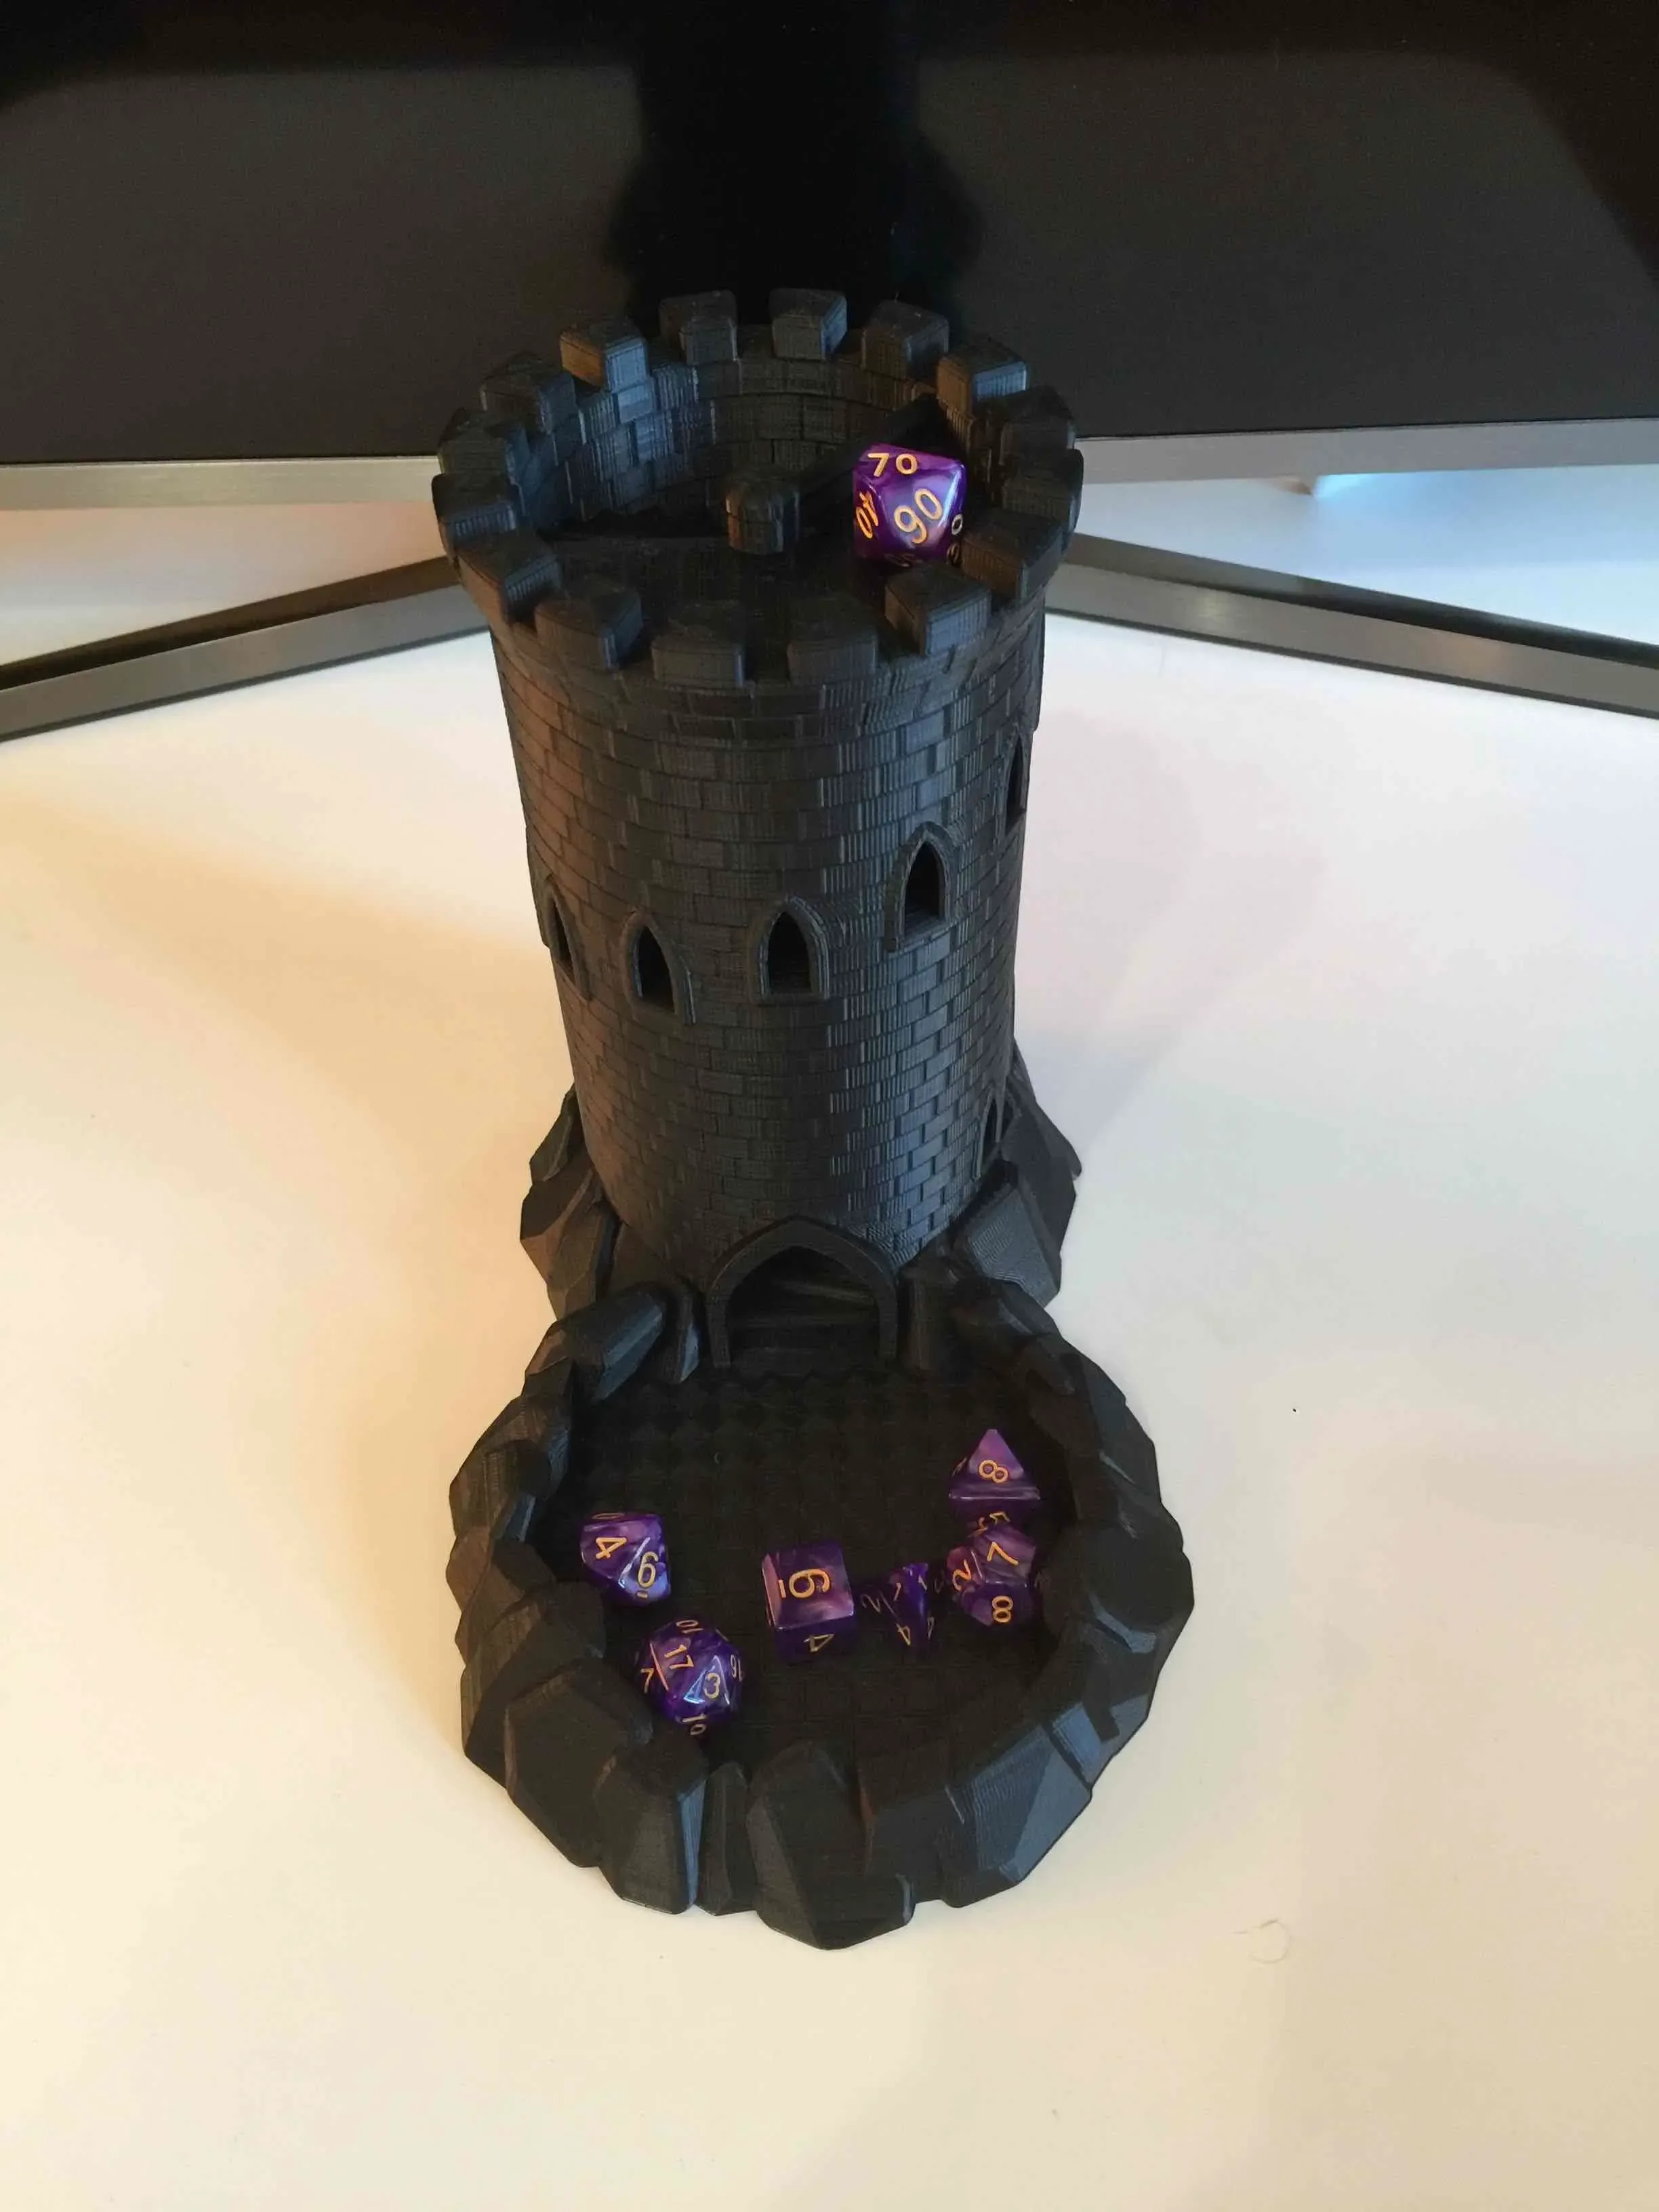 DnD Dice Tower | Dice Tower for Board Games | Dice Tower